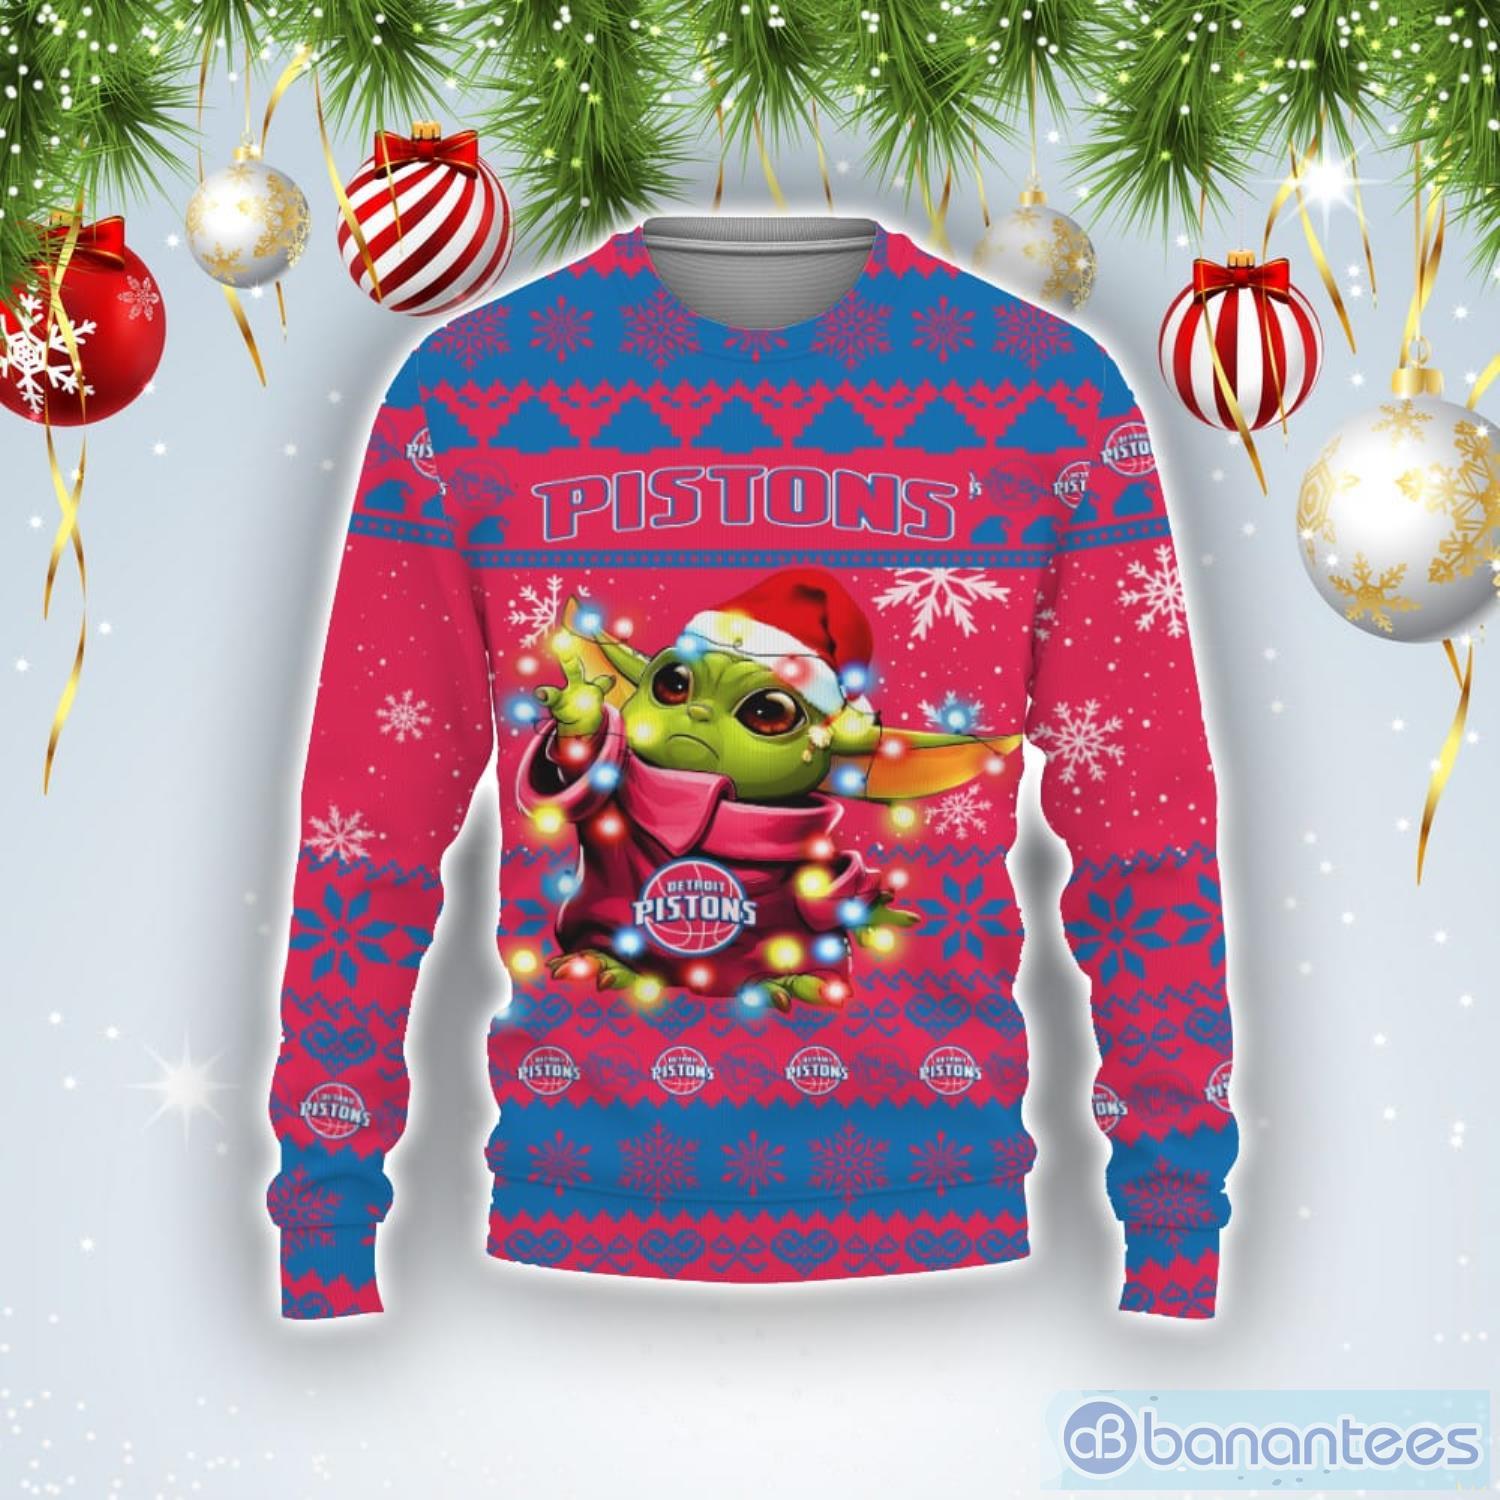 Detroit Pistons Baby Yoda Star Wars Sports Football American Ugly Christmas Sweater Product Photo 1